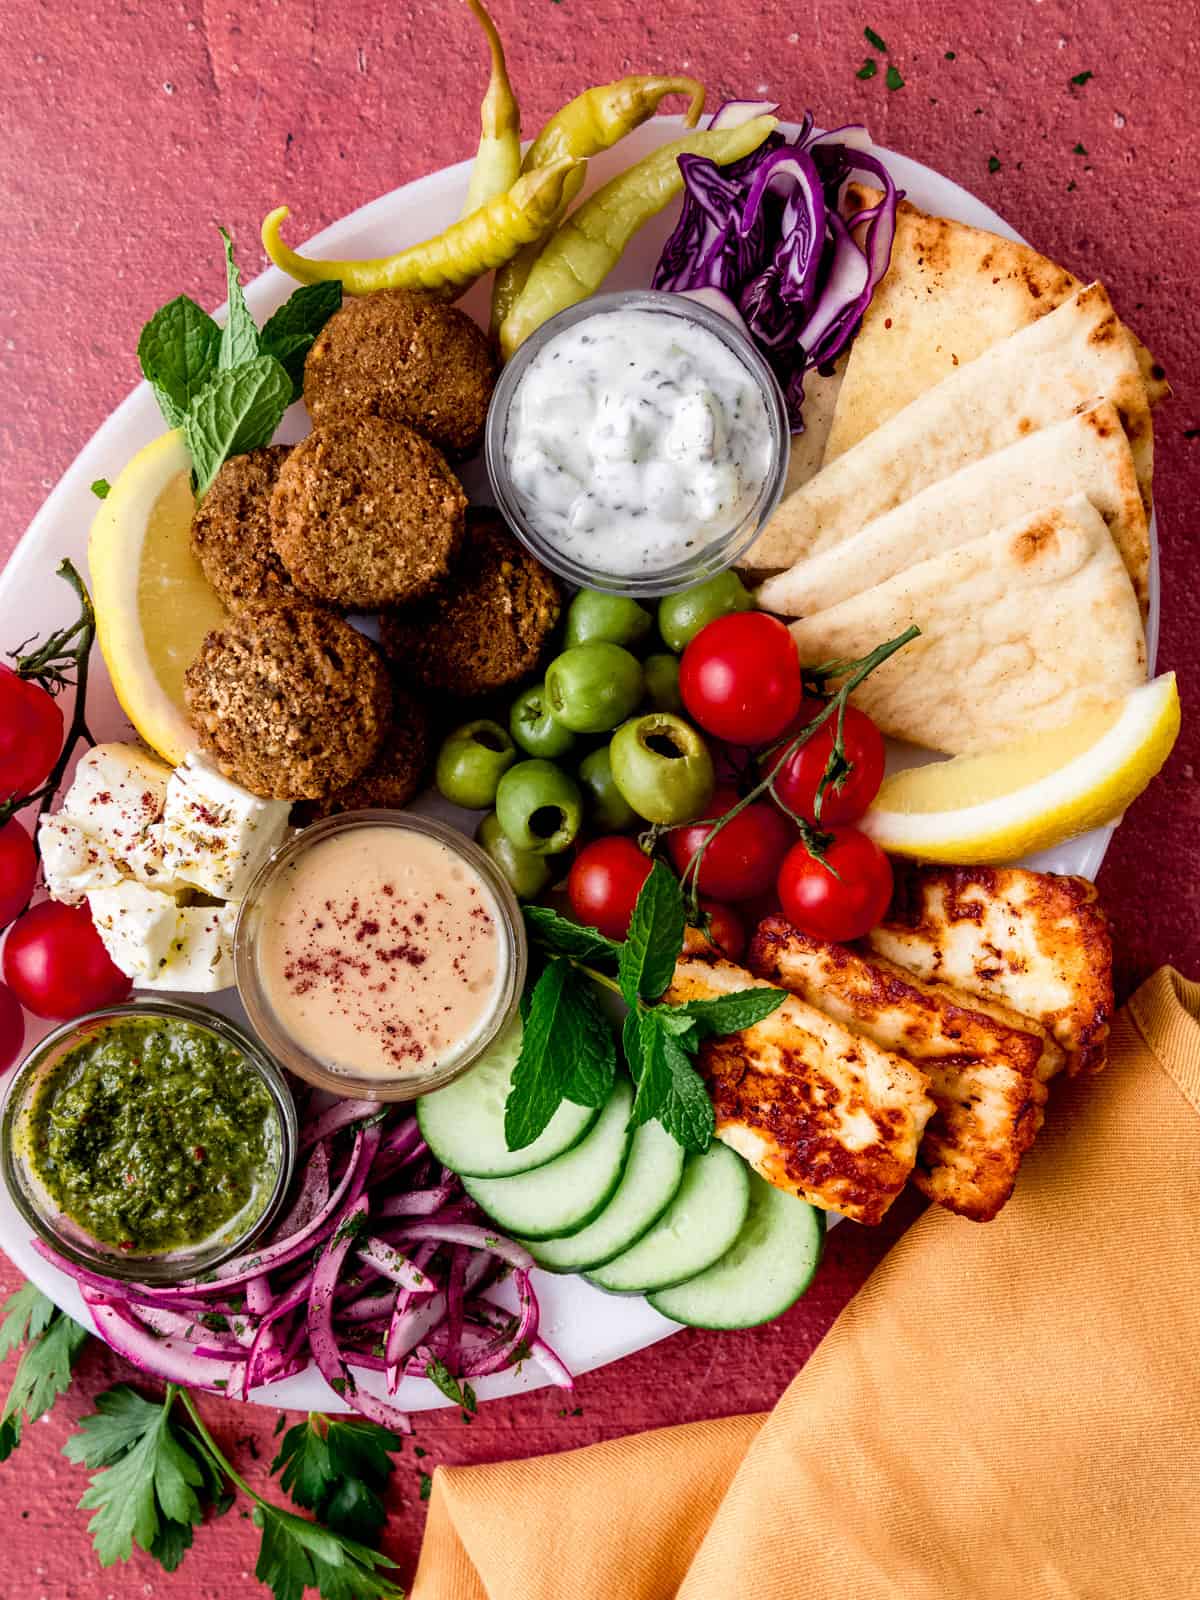 This falafel platter is filled with homemade falafel, tzatziki sauce and zhoug and everything you need to make a falafel wrap!